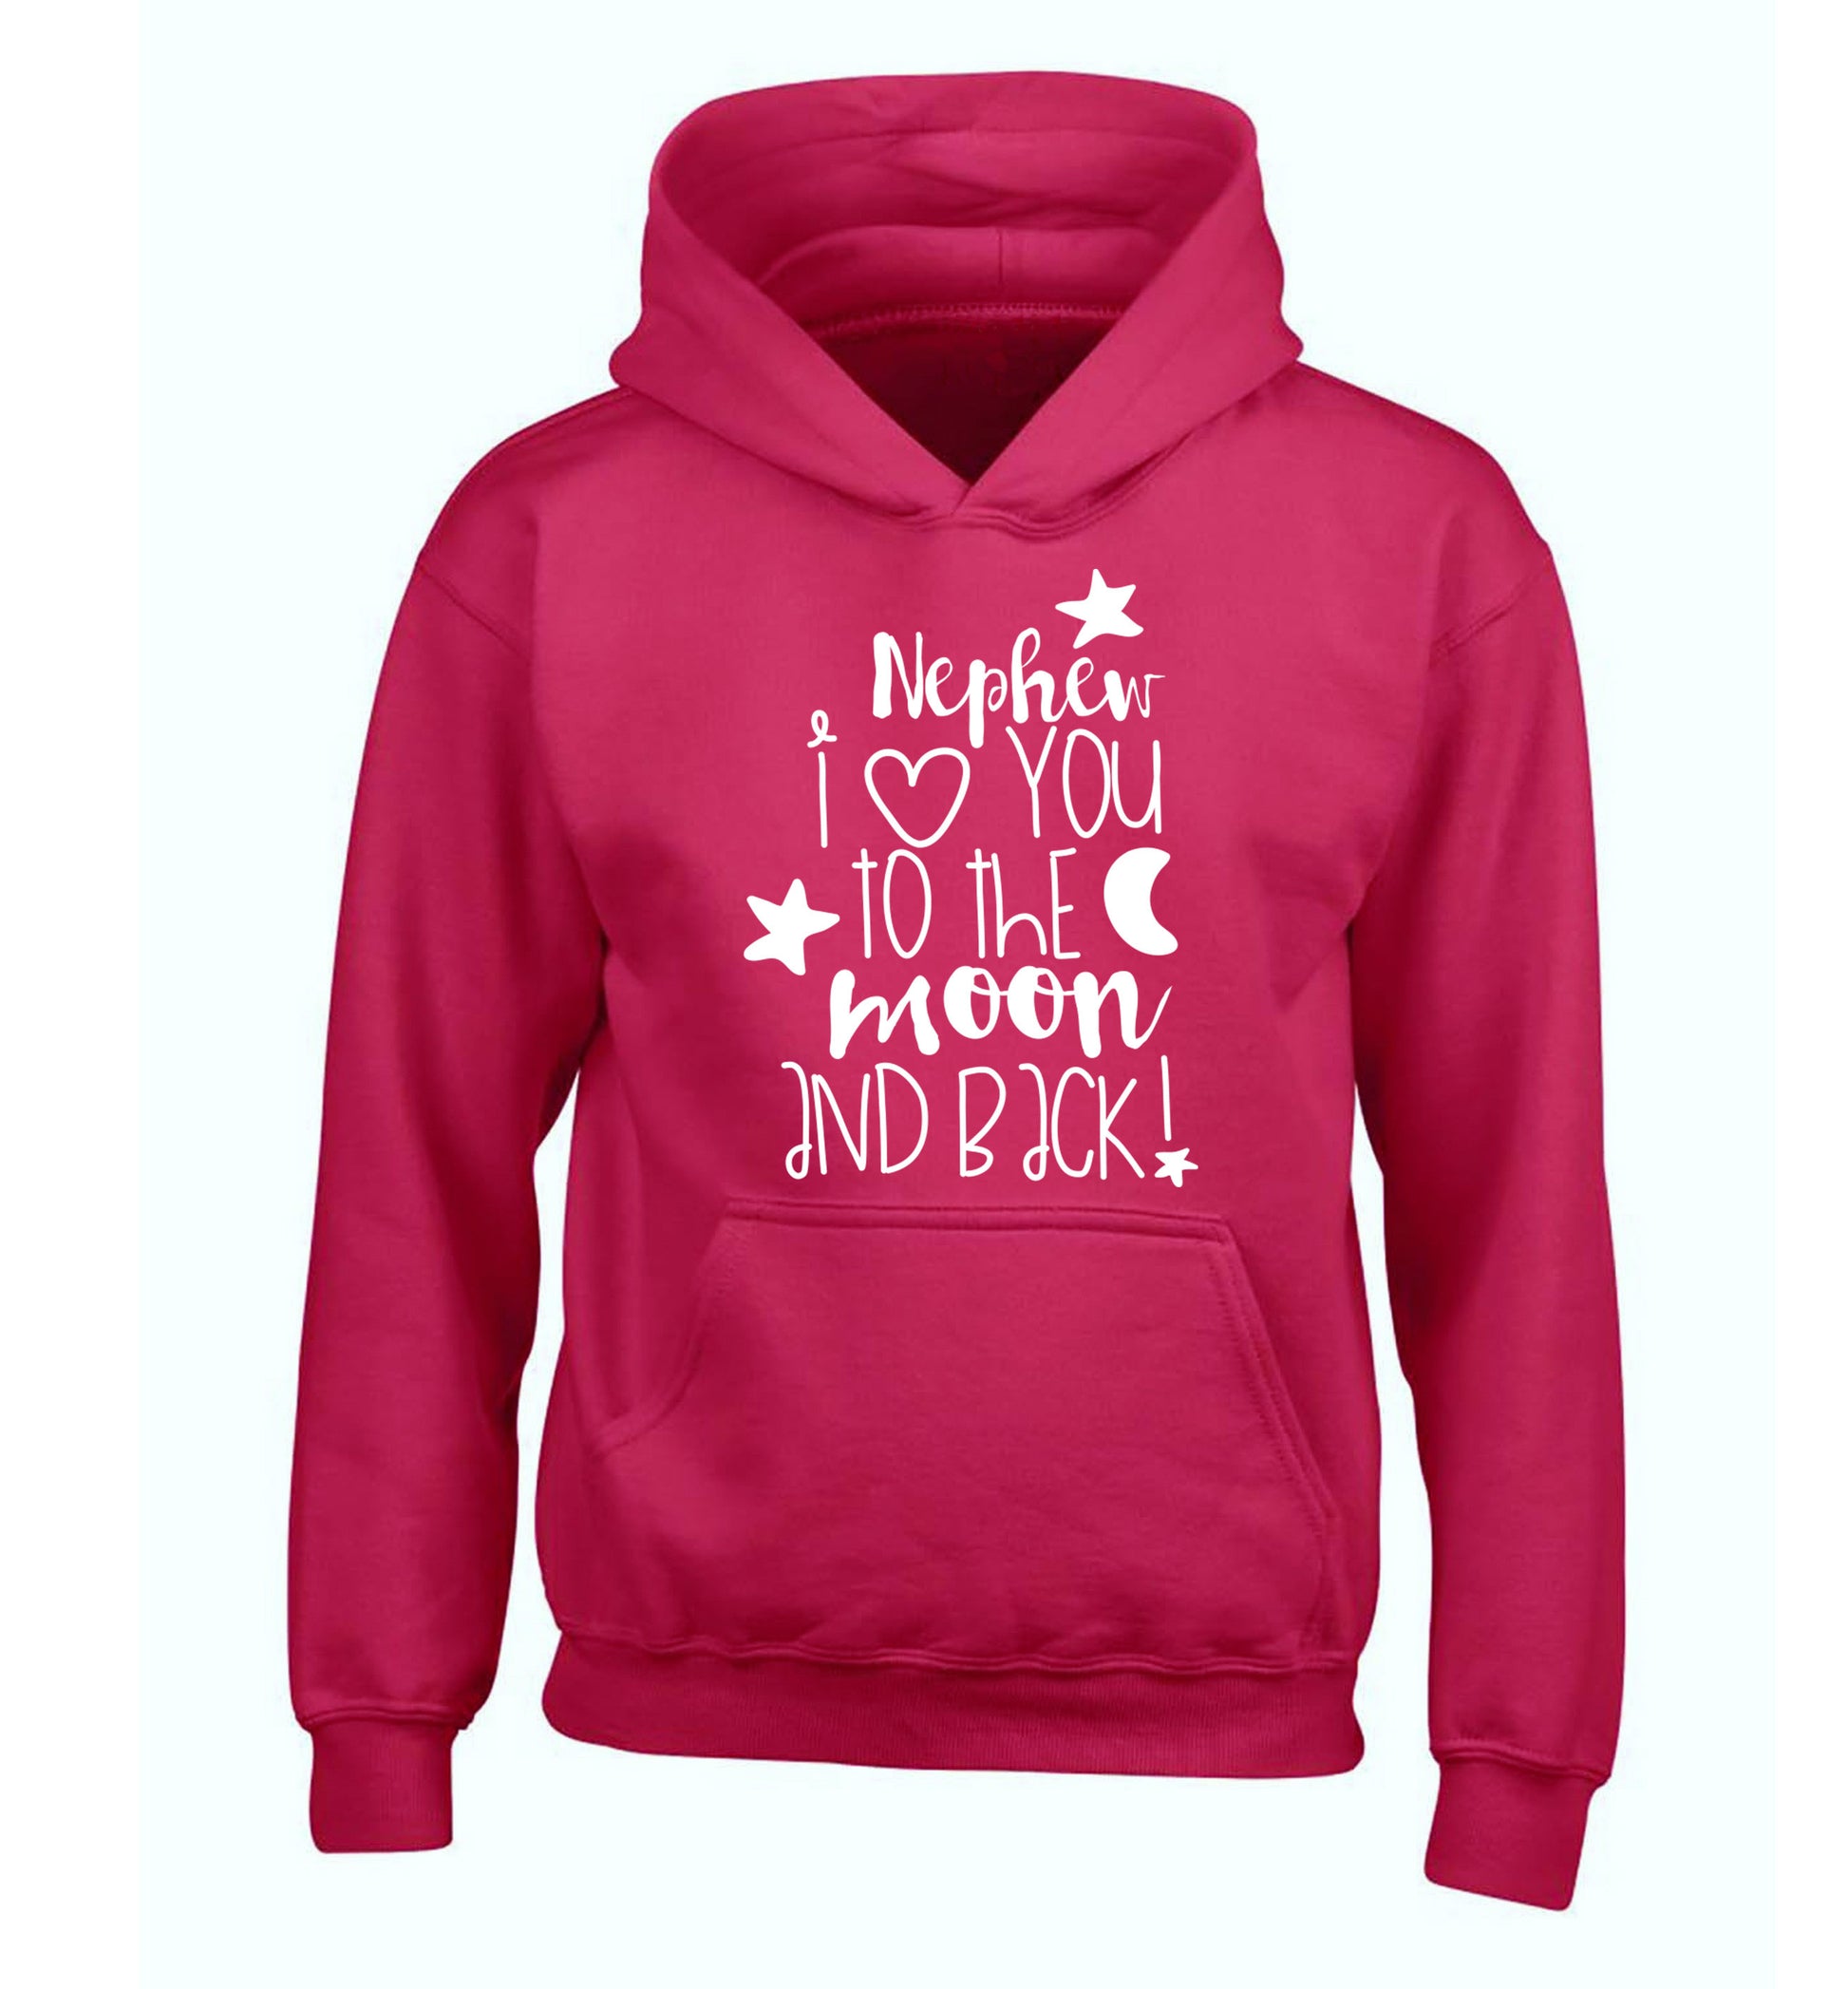 Nephew I love you to the moon and back children's pink hoodie 12-14 Years